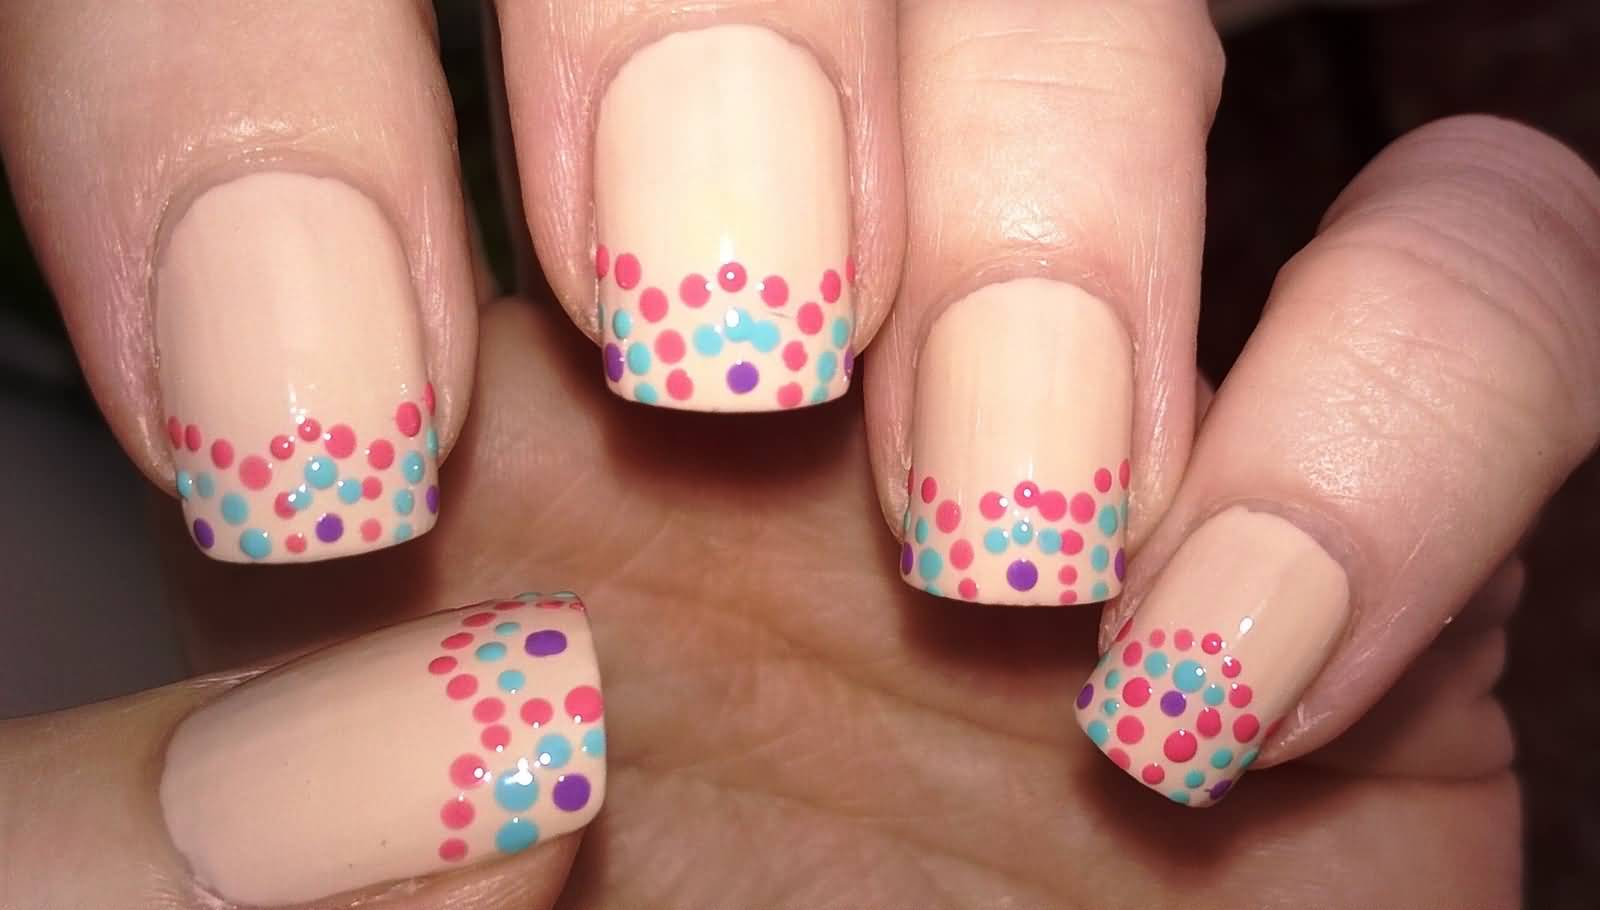 Beige Nails With Multicolored Dots Design Nail Art